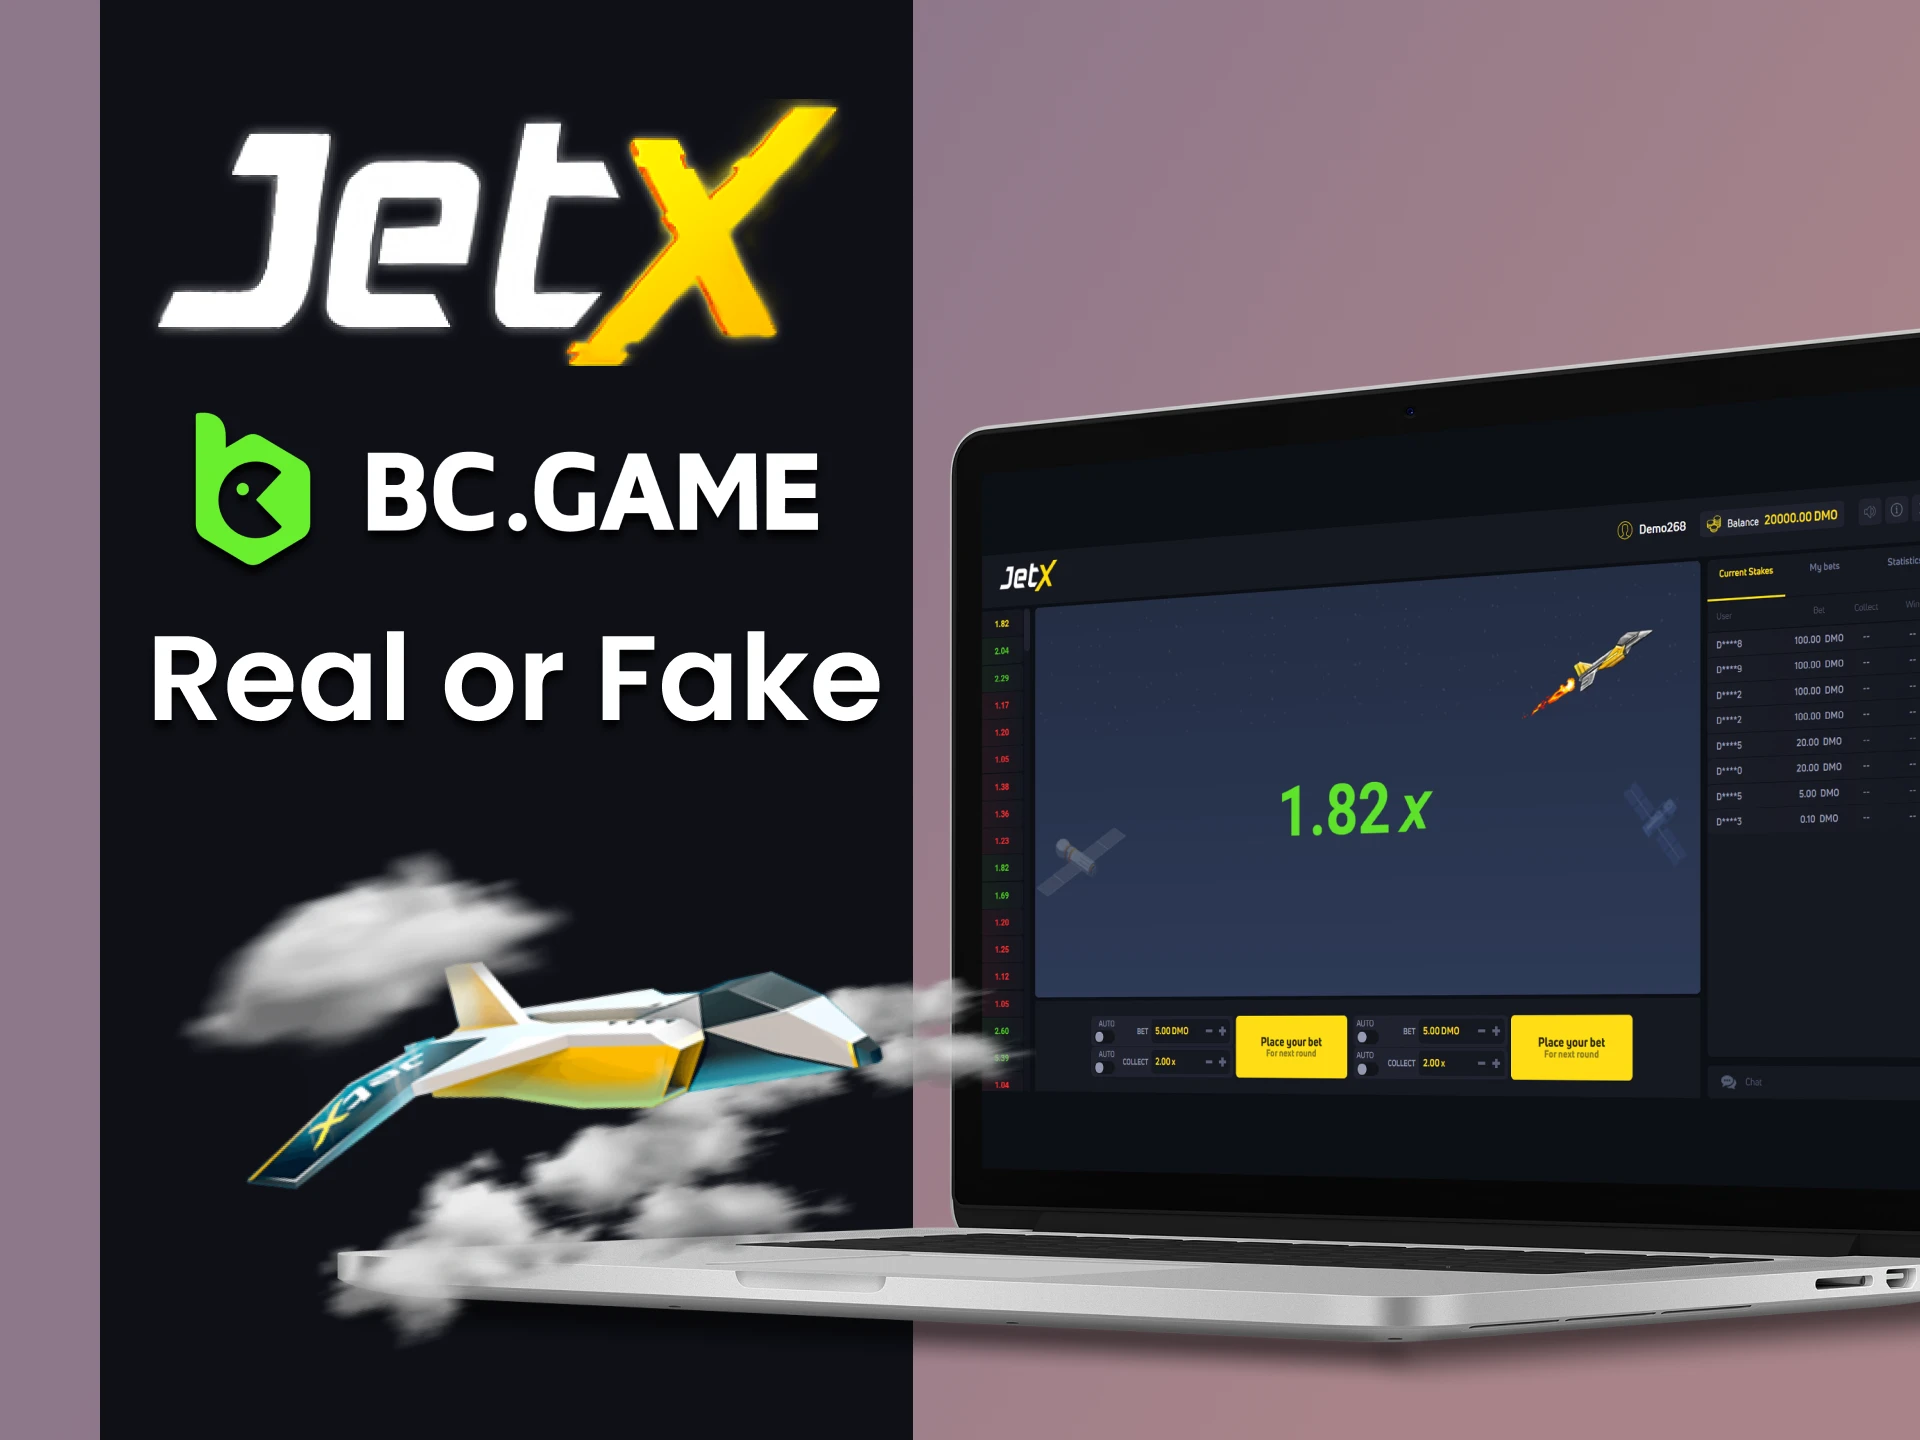 You can actually play JetX on BC Game.